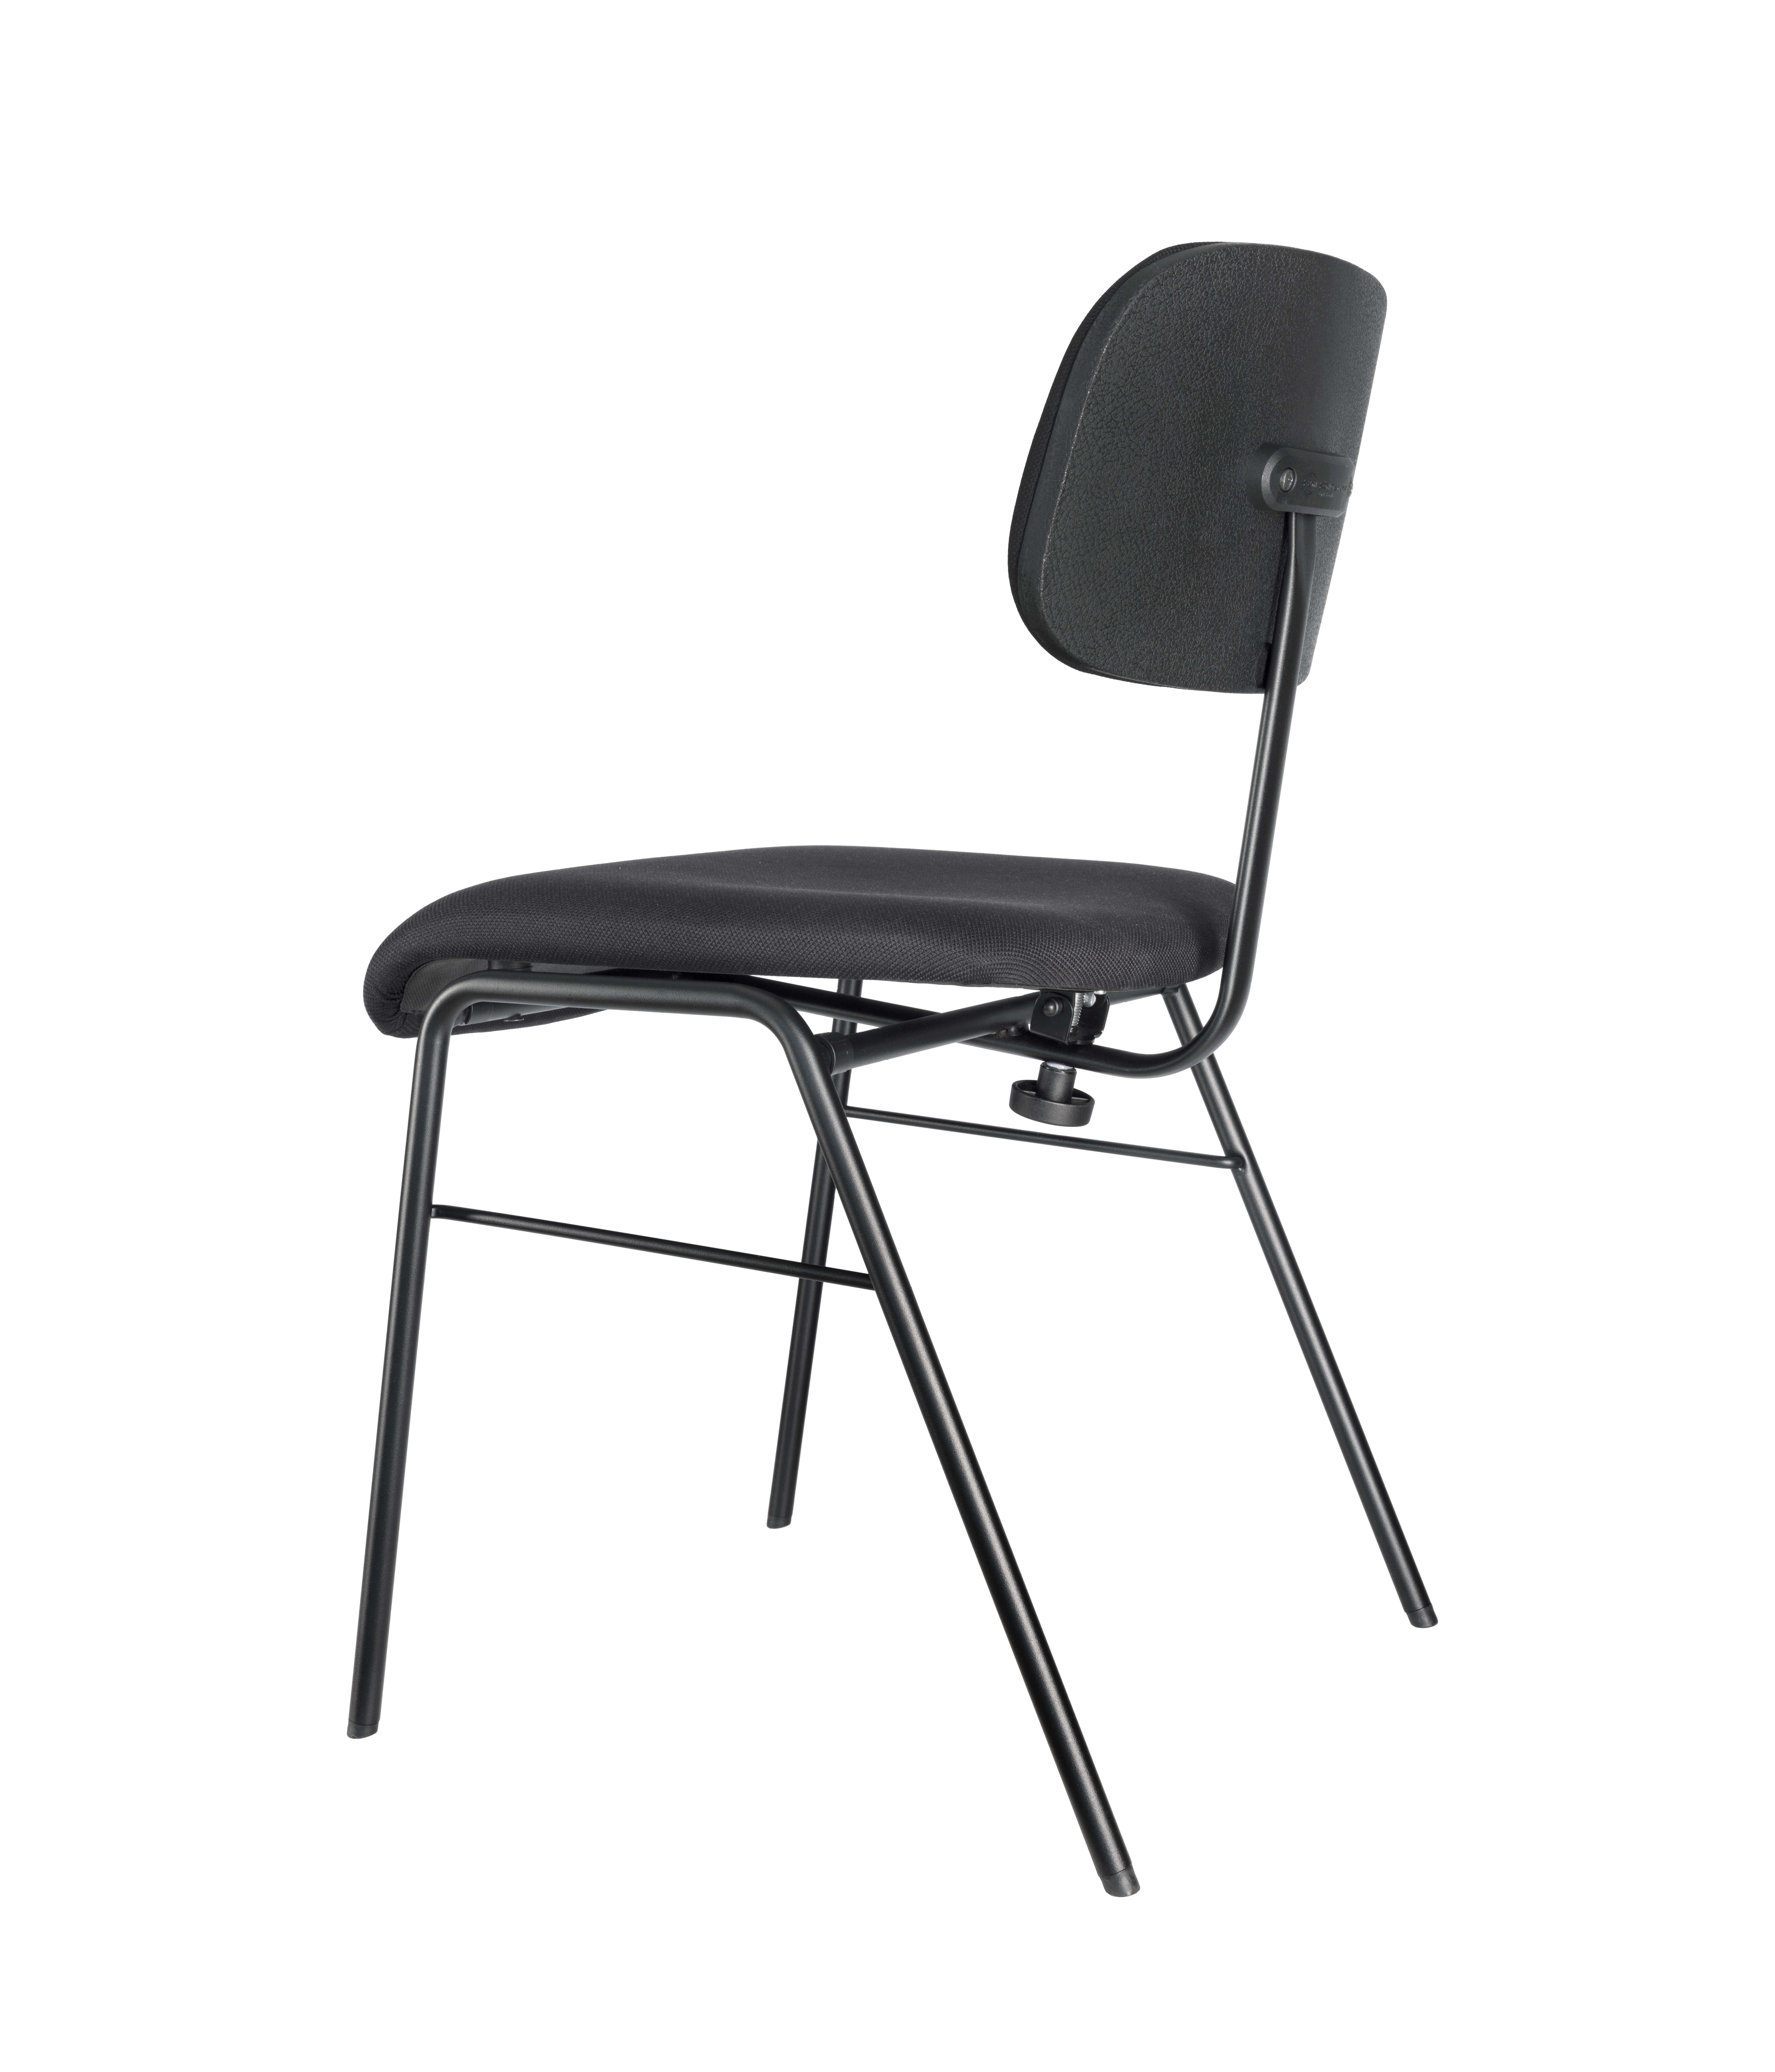 Orchestra chair with tiltable seat